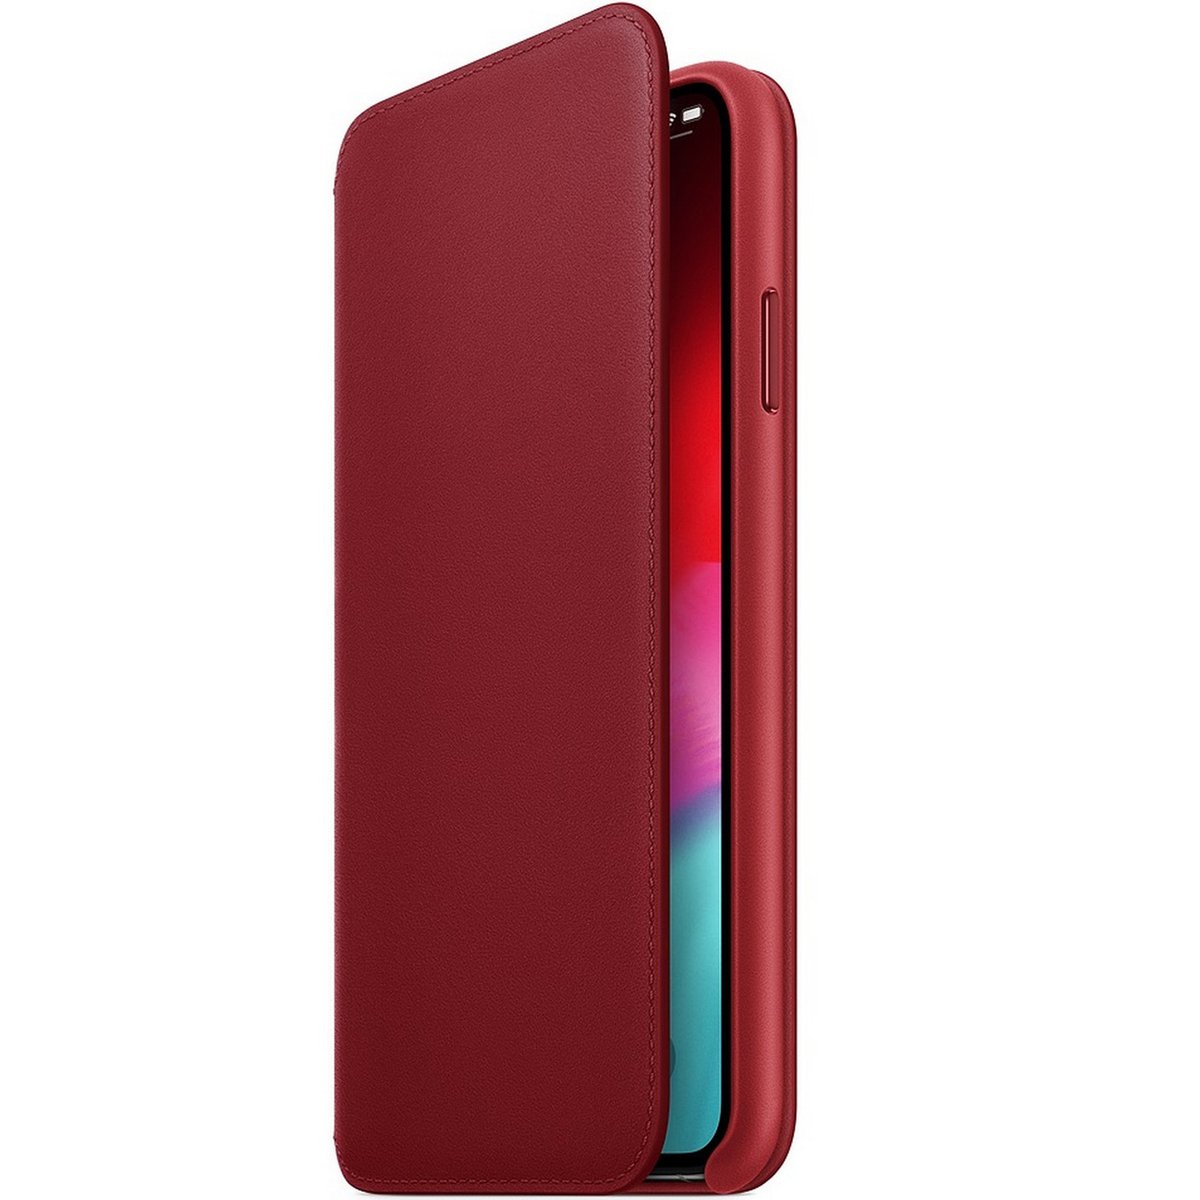 Apple iPhone XS Max Leather Folio Case (PRODUCT)RED